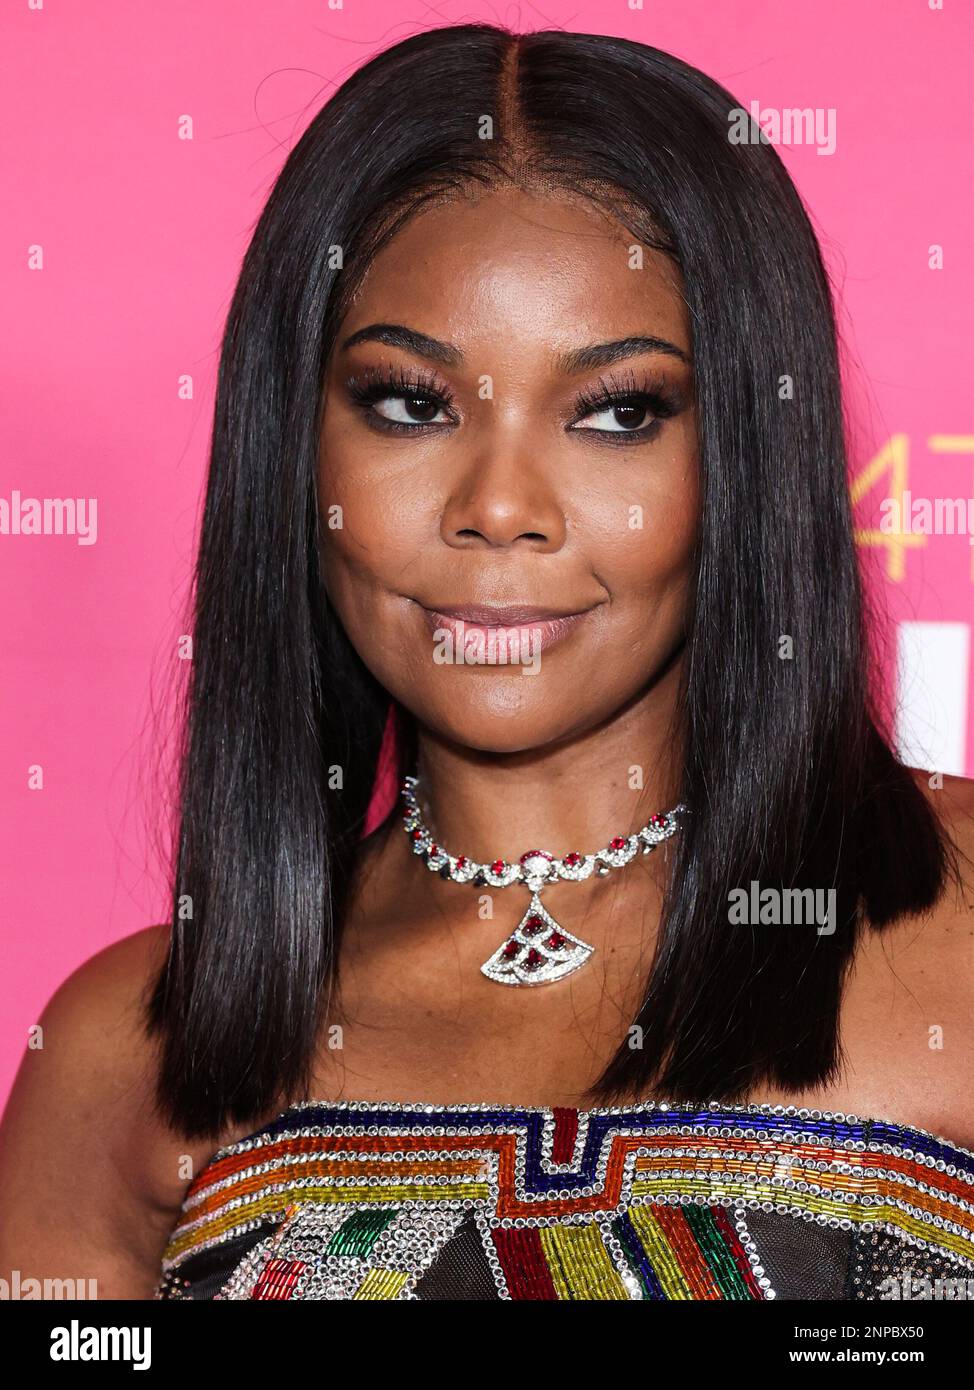 Pasadena, United States. 25th Feb, 2023. PASADENA, LOS ANGELES, CALIFORNIA, USA - FEBRUARY 25: American actress Gabrielle Union, recipient of the President's Award wearing Atelier Versace SS98 Couture poses in the press room at the 54th Annual NAACP Image Awards held at the Pasadena Civic Auditorium on February 25, 2023 in Pasadena, Los Angeles, California, United States. (Photo by Xavier Collin/Image Press Agency) Credit: Image Press Agency/Alamy Live News Stock Photo